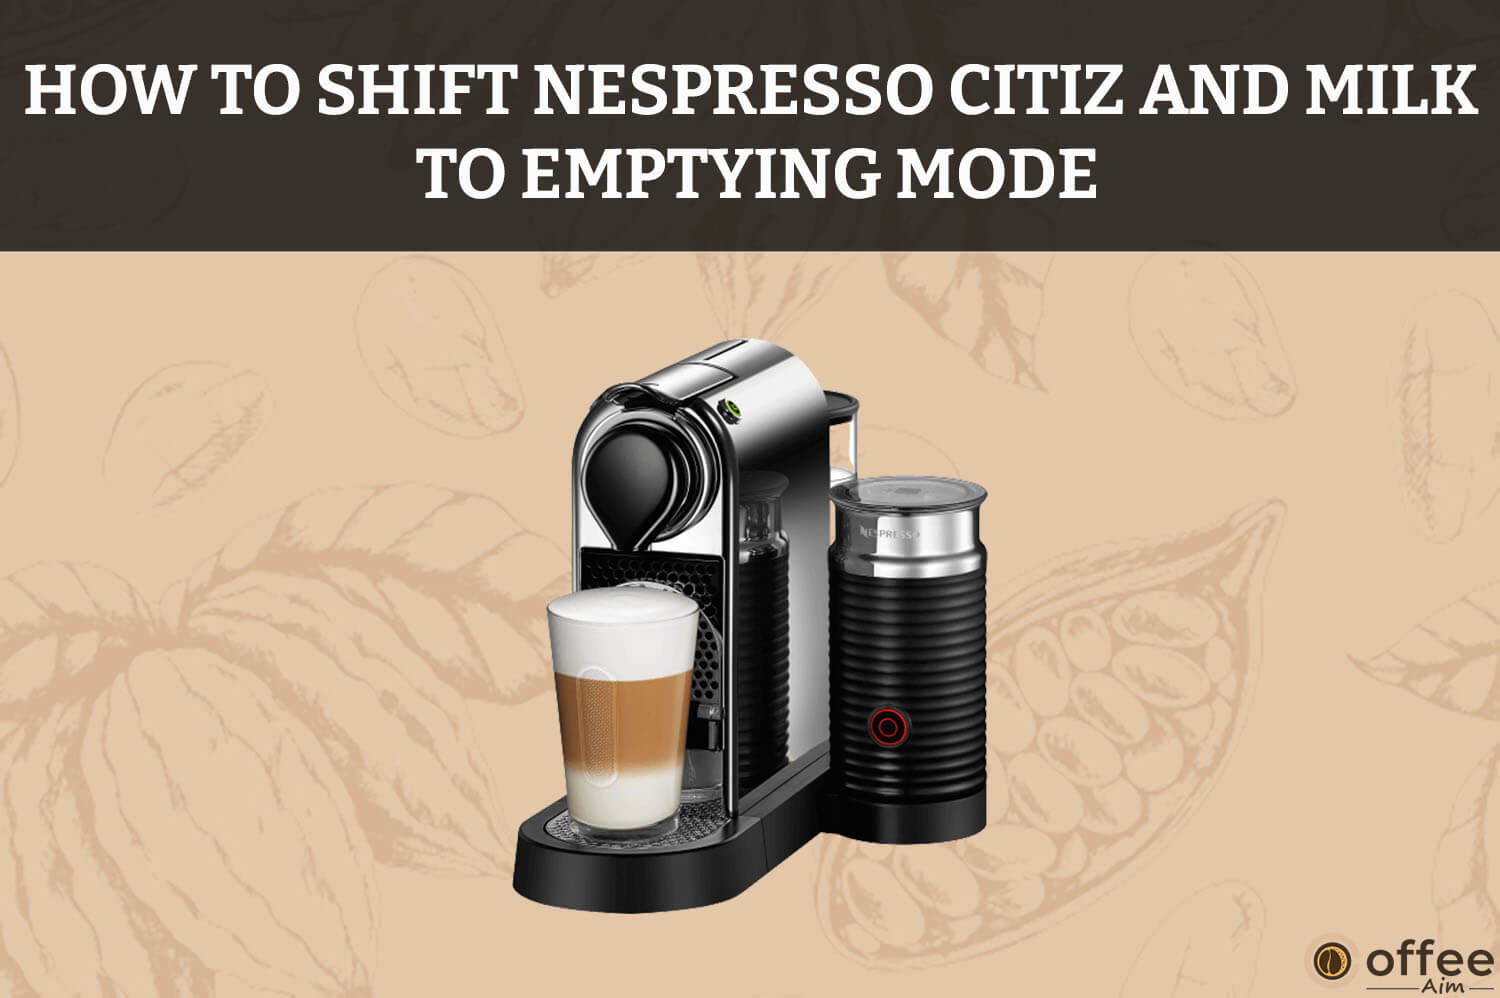 Featured image for the article "How To Shift Nespresso CitiZ And Milk To Emptying Mode"